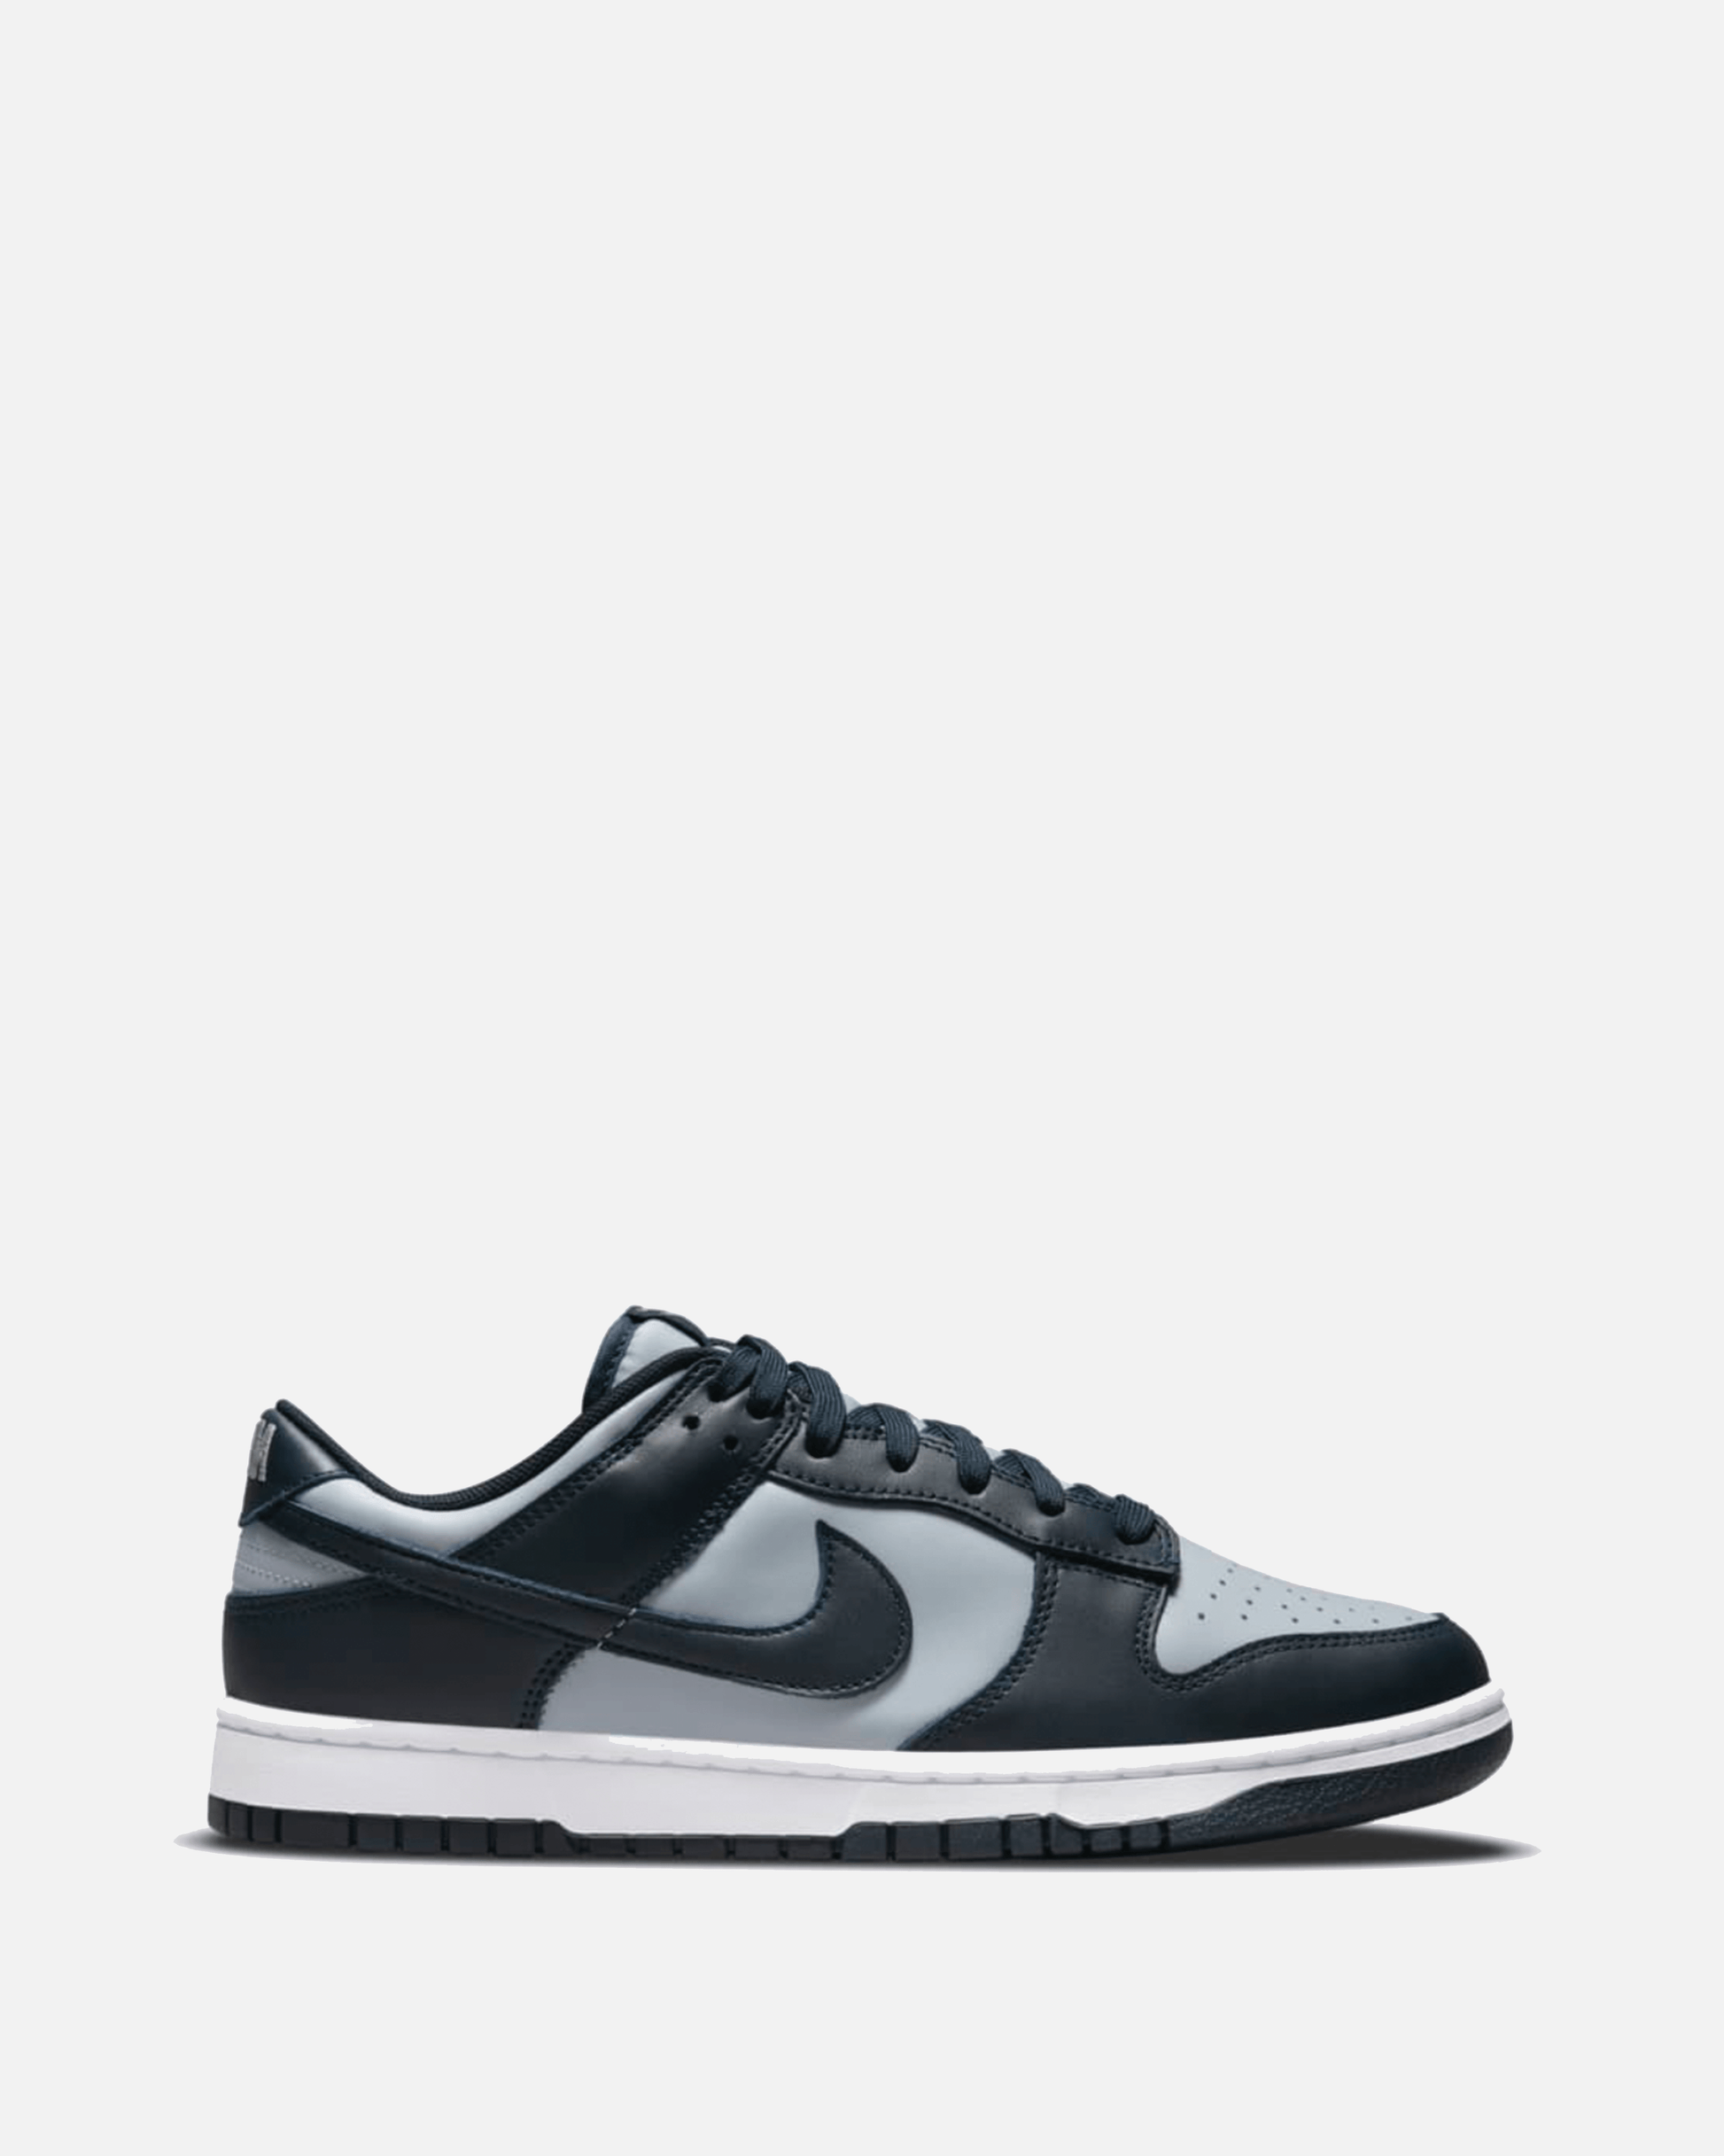 Nike Releases Dunk Low 'Championship Grey'